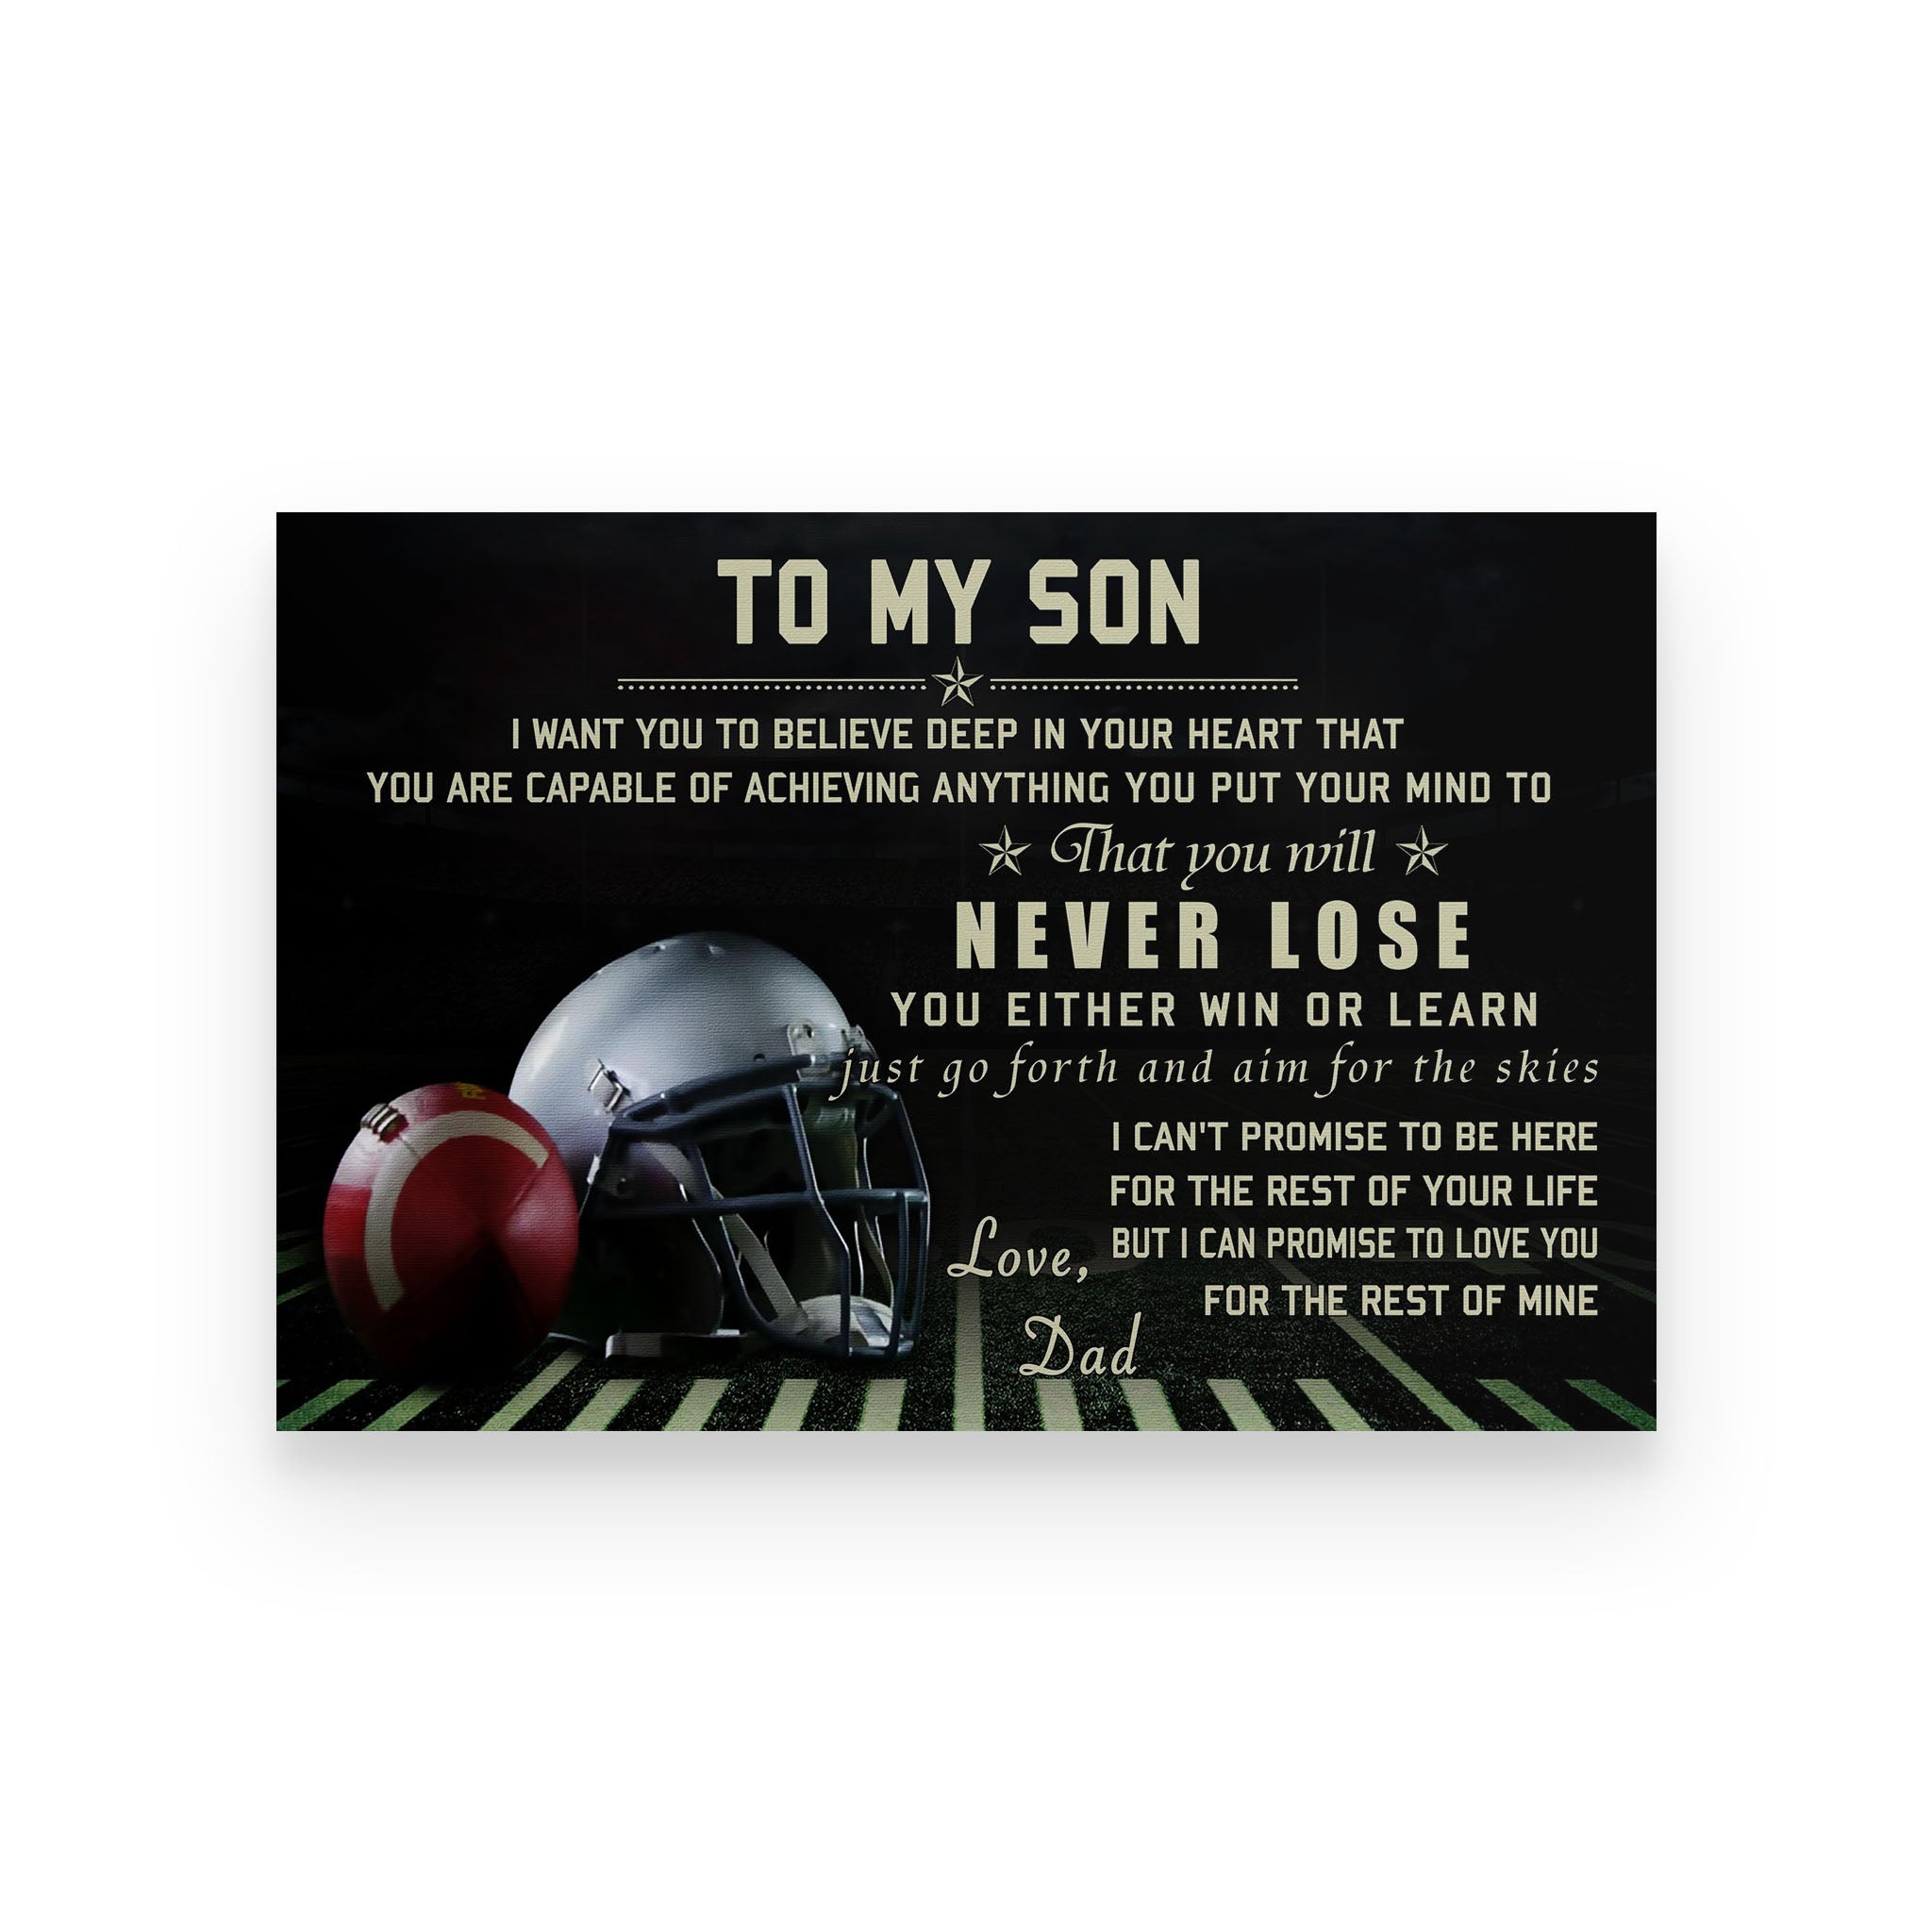 American football poster dad to son I want you to believe deep in your heart vs6